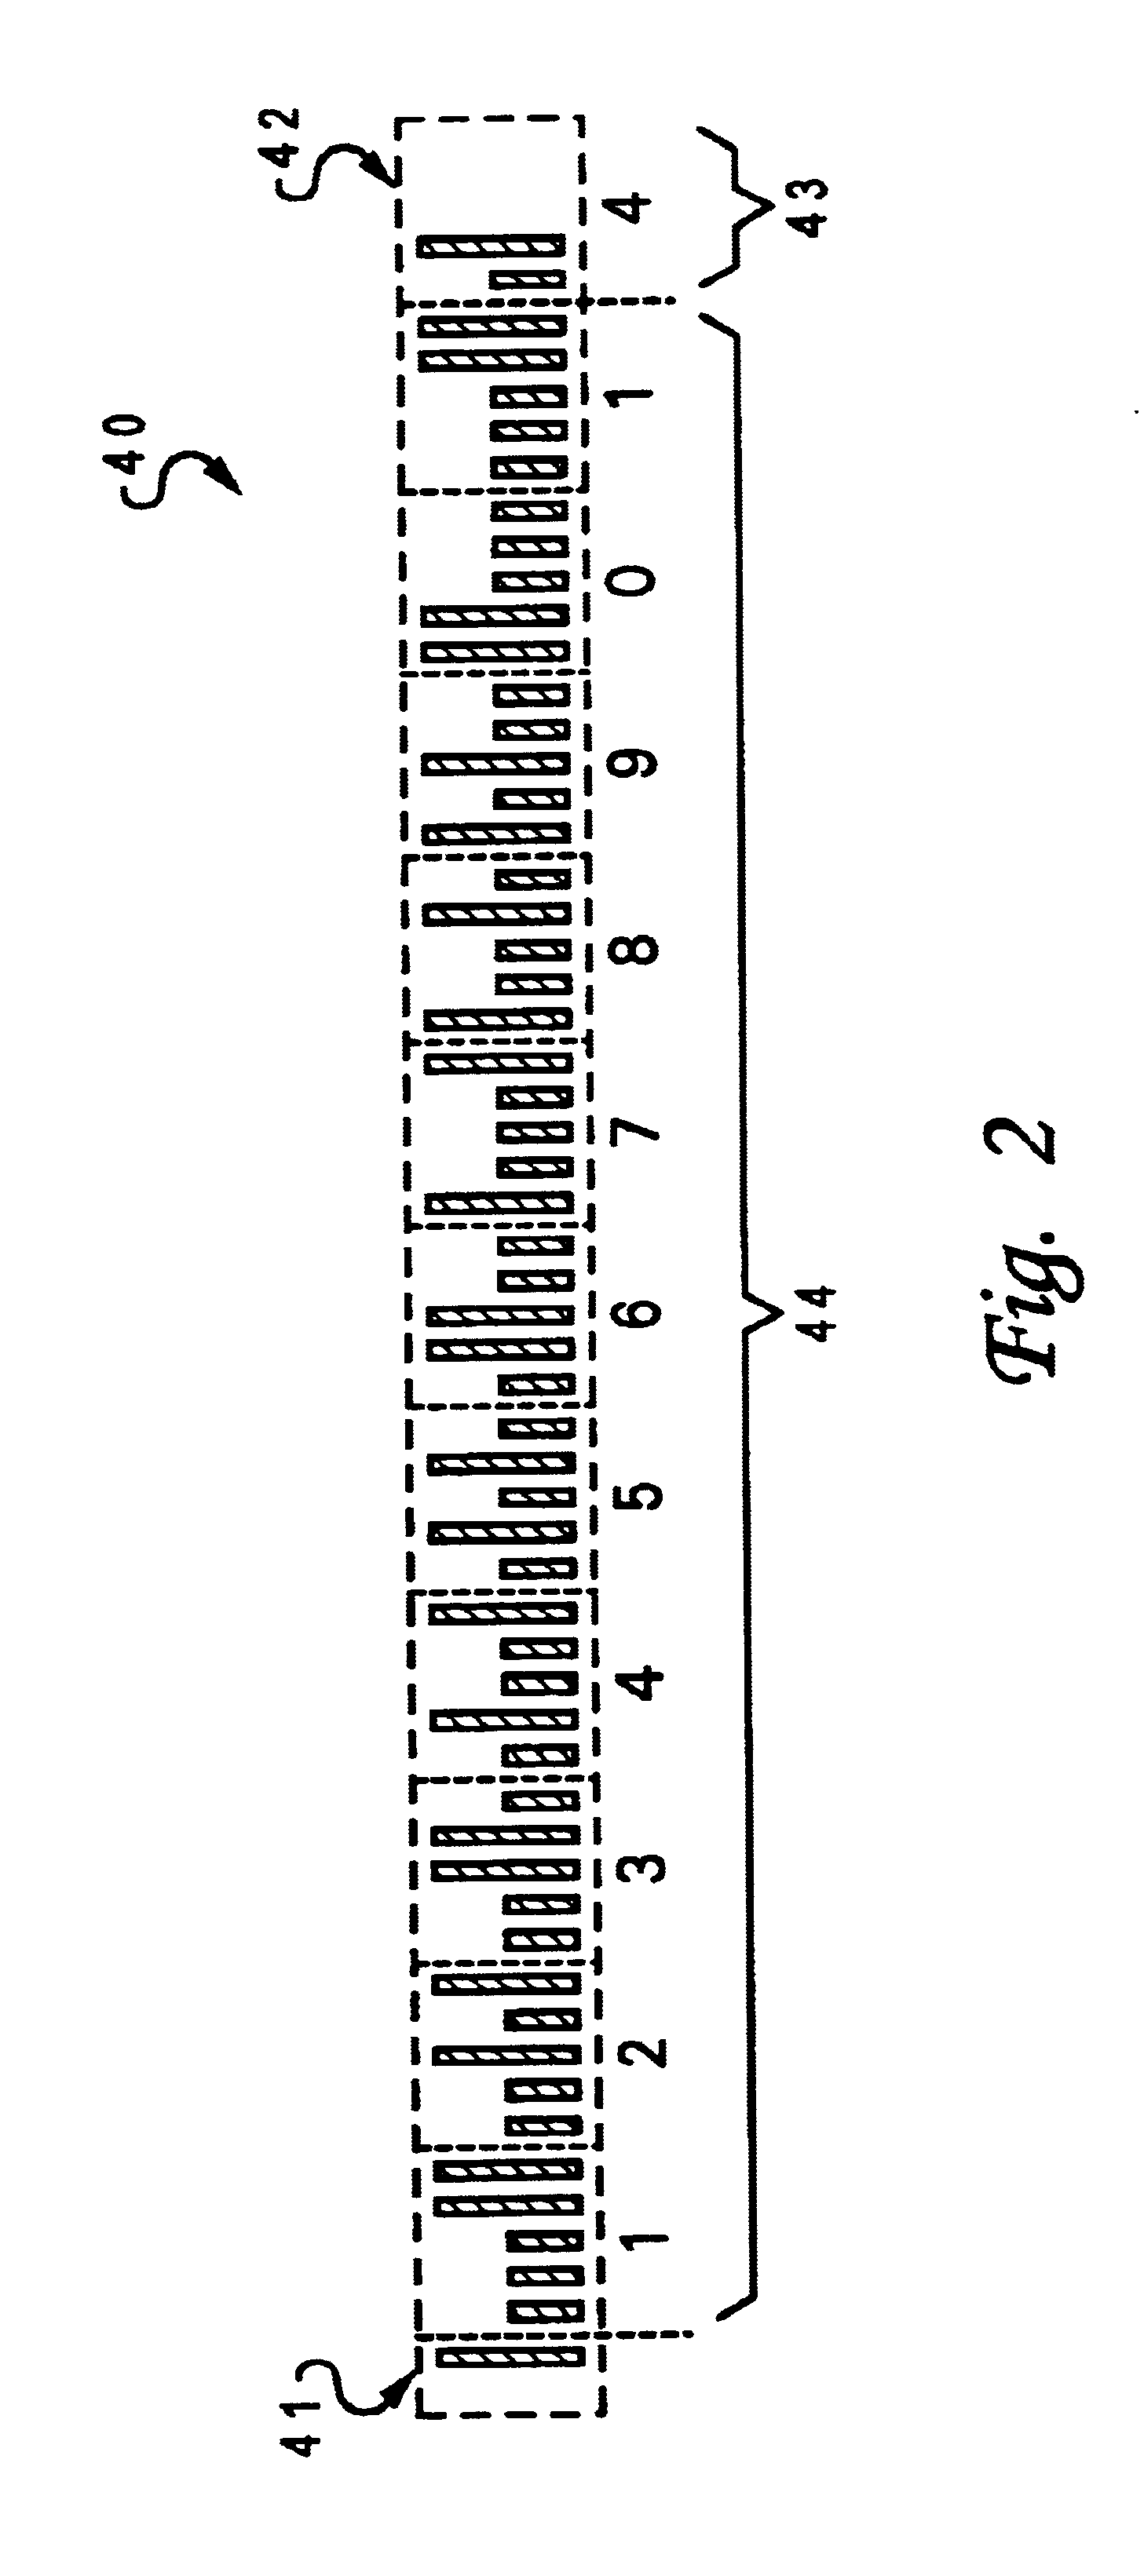 Method and apparatus for evaluating a confidence level of a decoded barcode